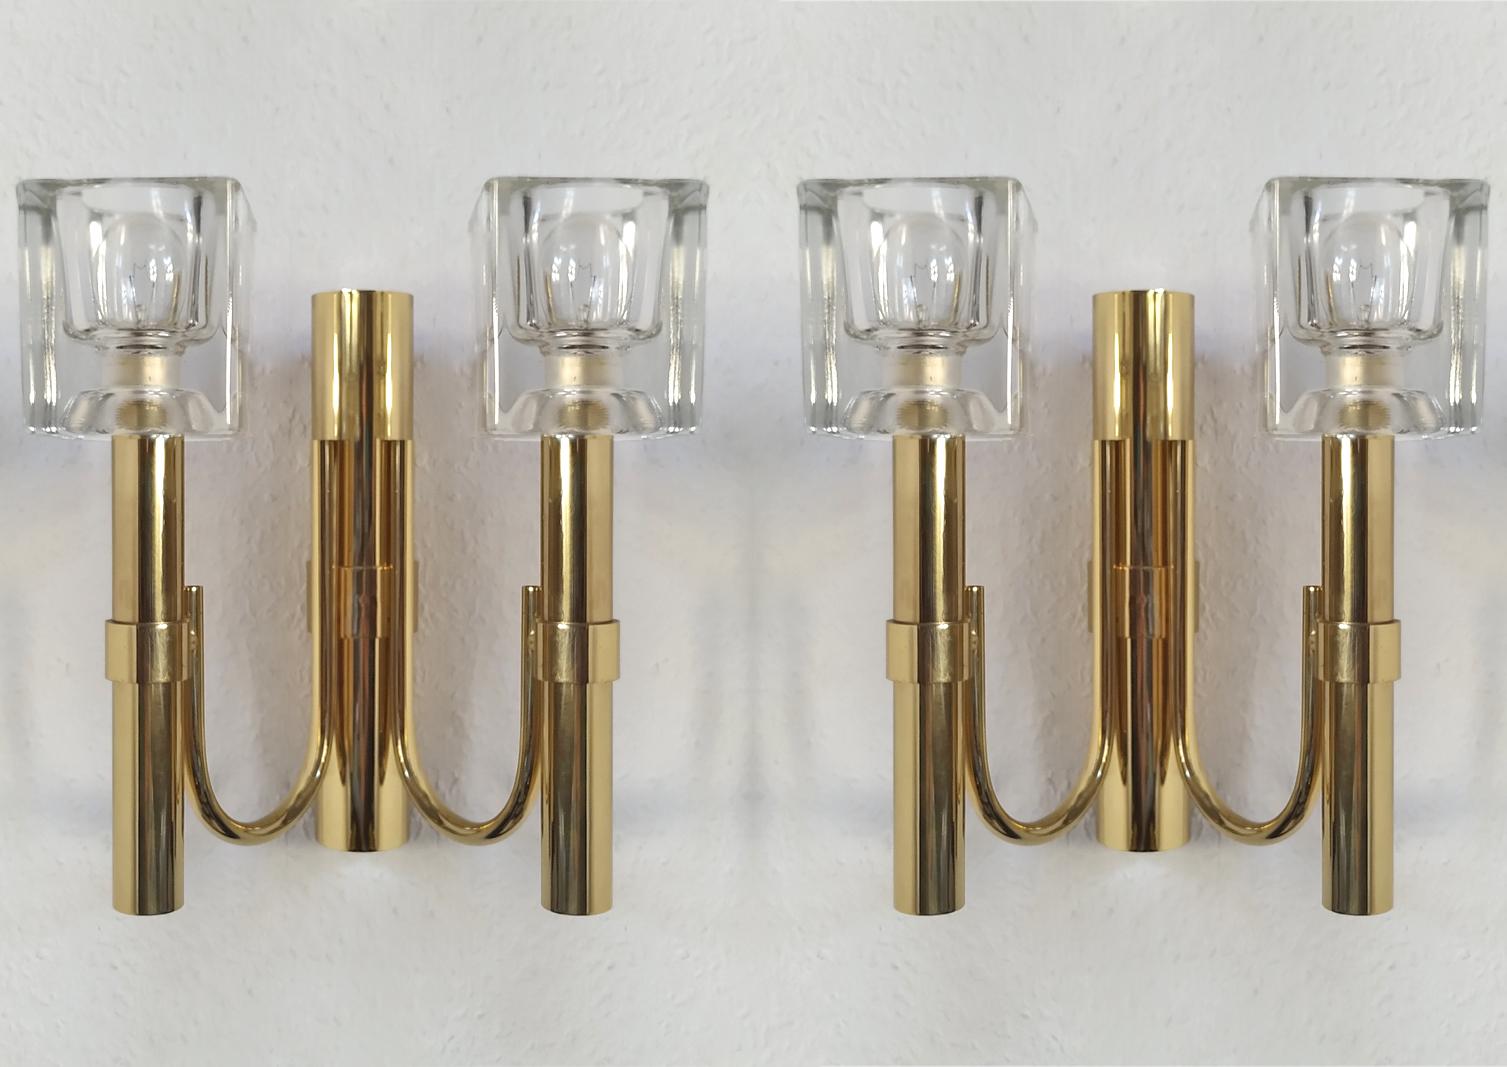 20th Century Pair of Italian Vintage Modernist Brass and Glass Sciolari Wall Lights Sconces For Sale